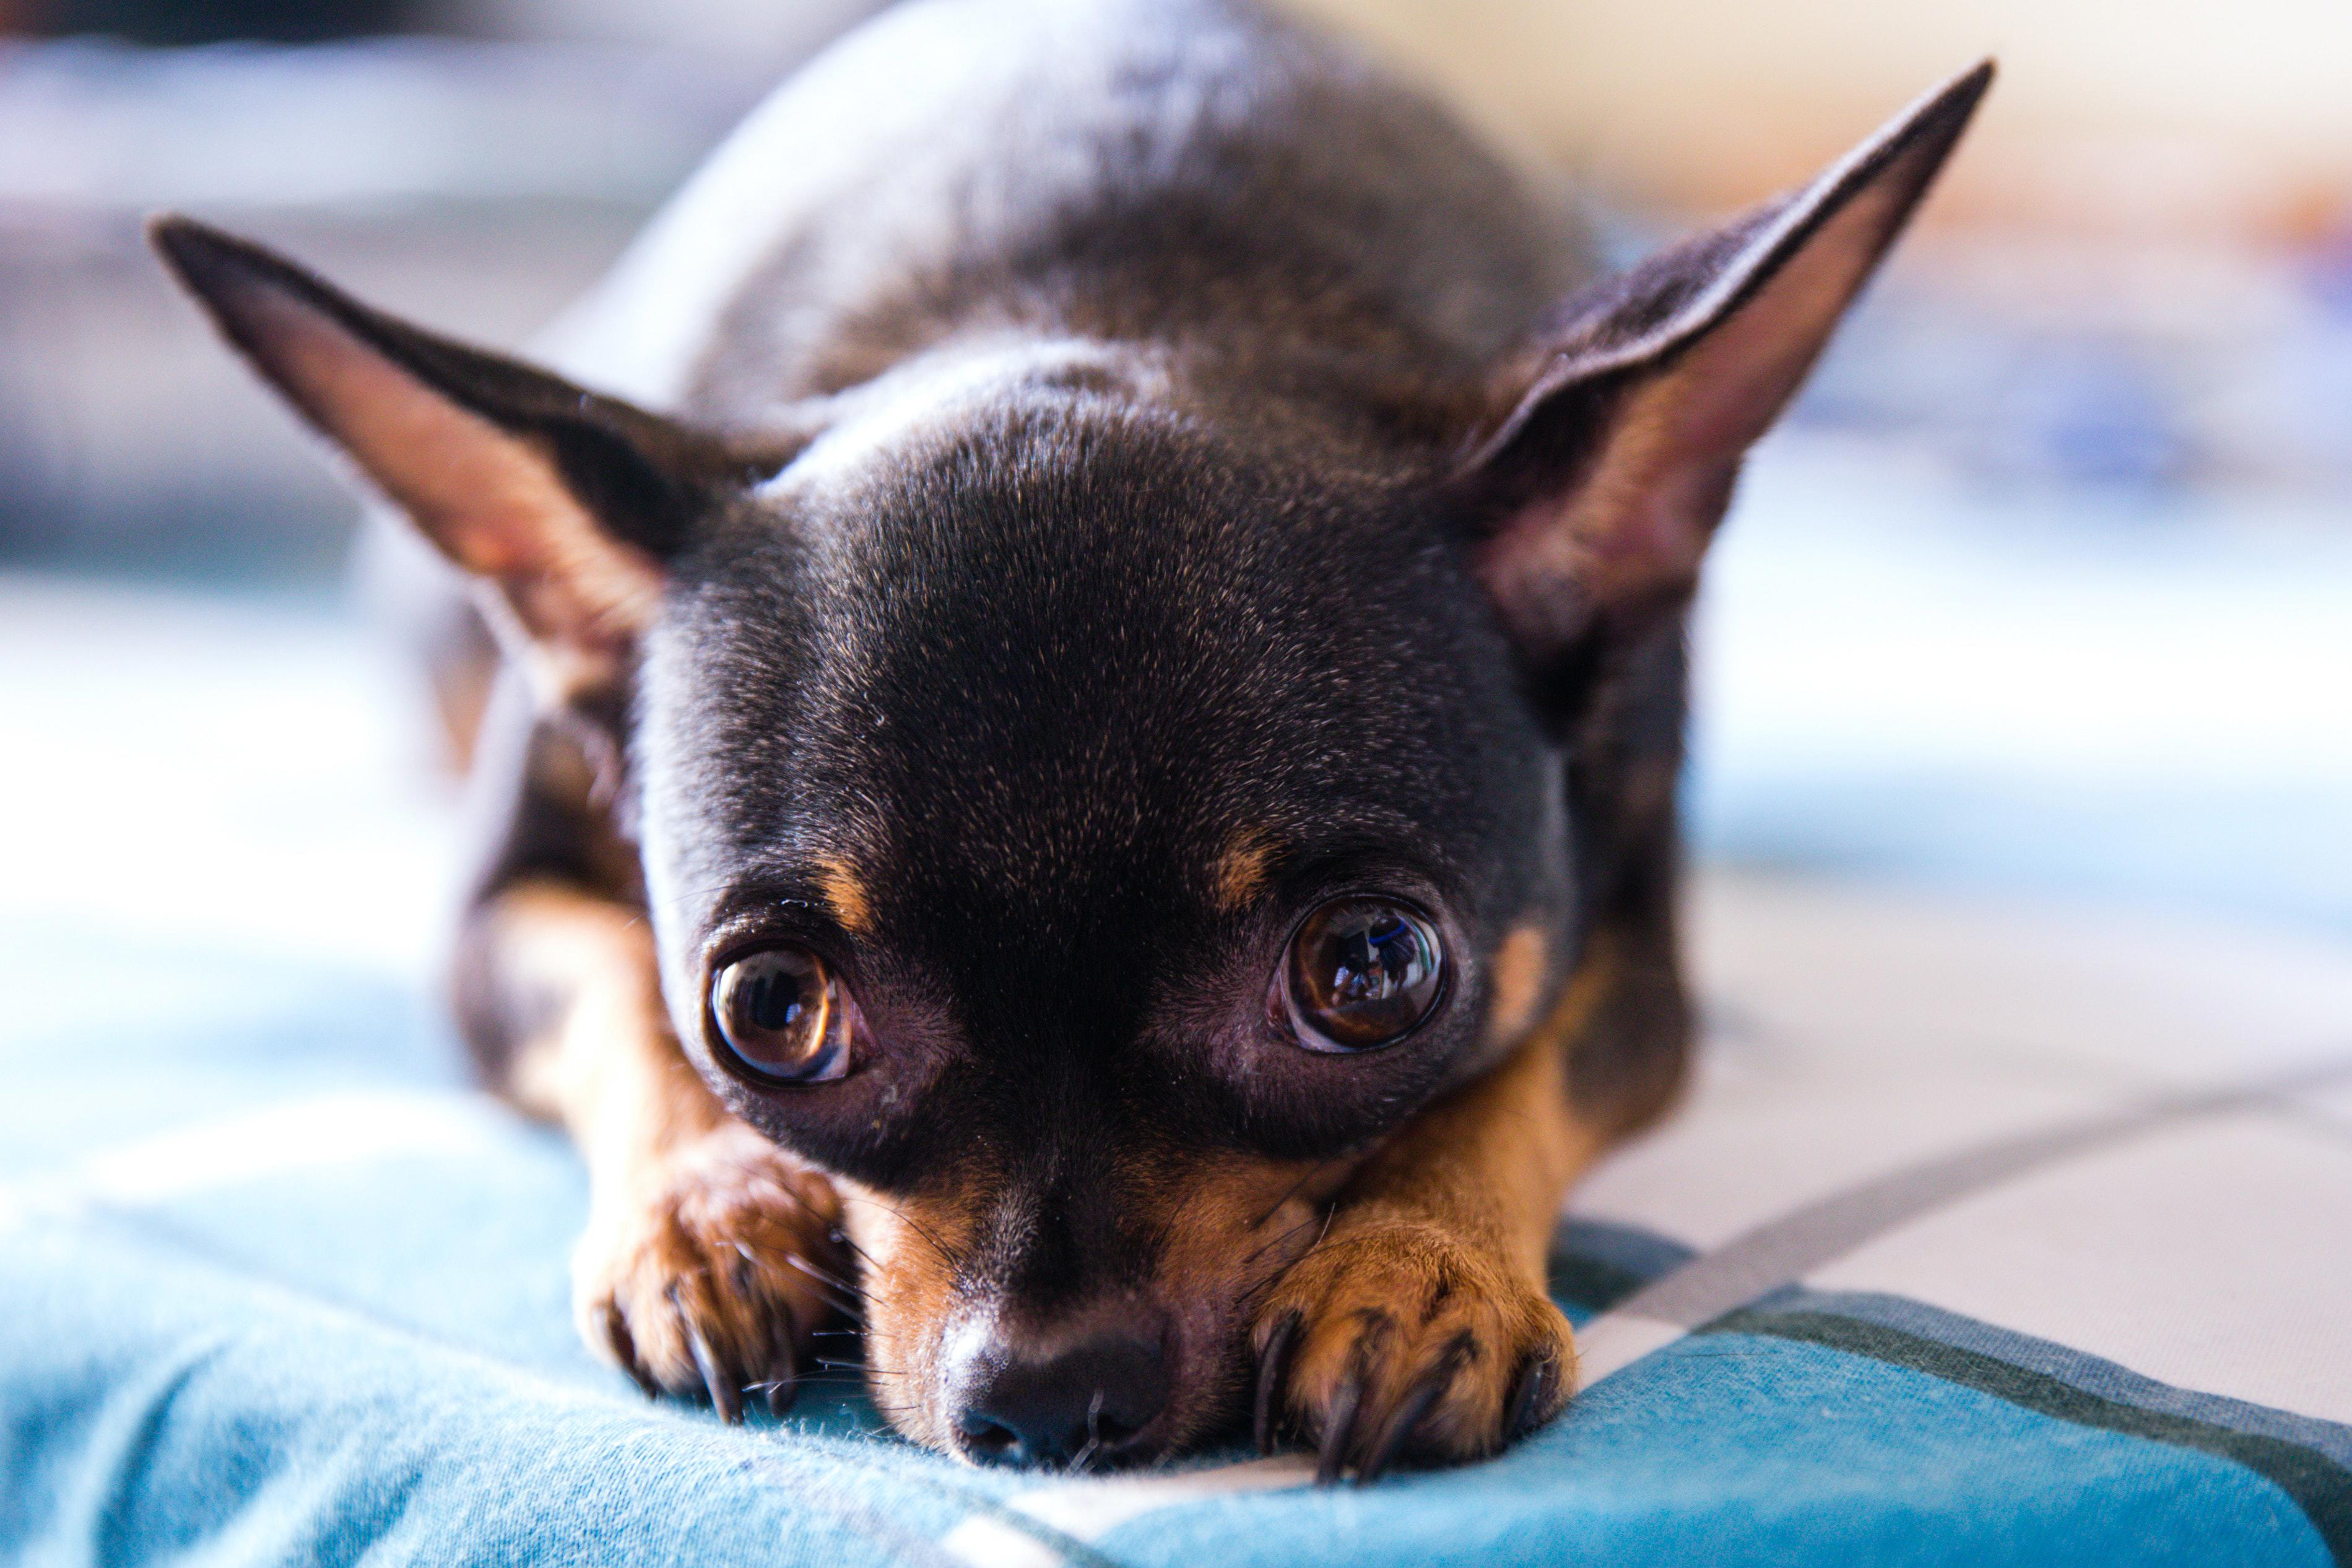 The Exercise Requirements of Chihuahuas: How Much Exercise Does Your Chihuahua Need?